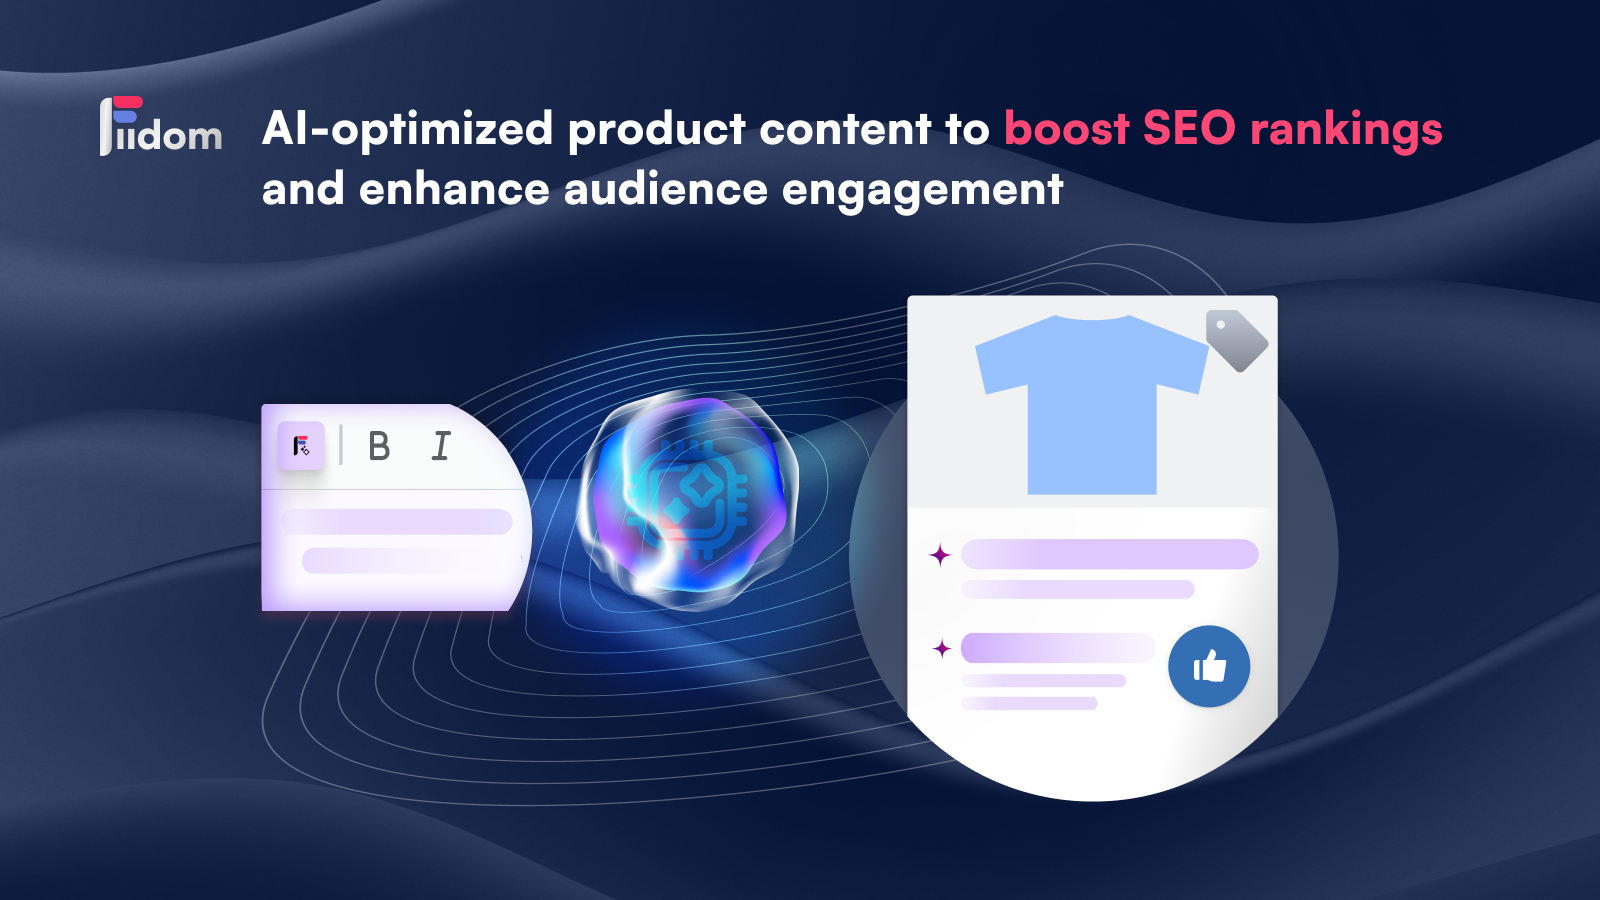 Content optimized not only for SEO but also audience engagement